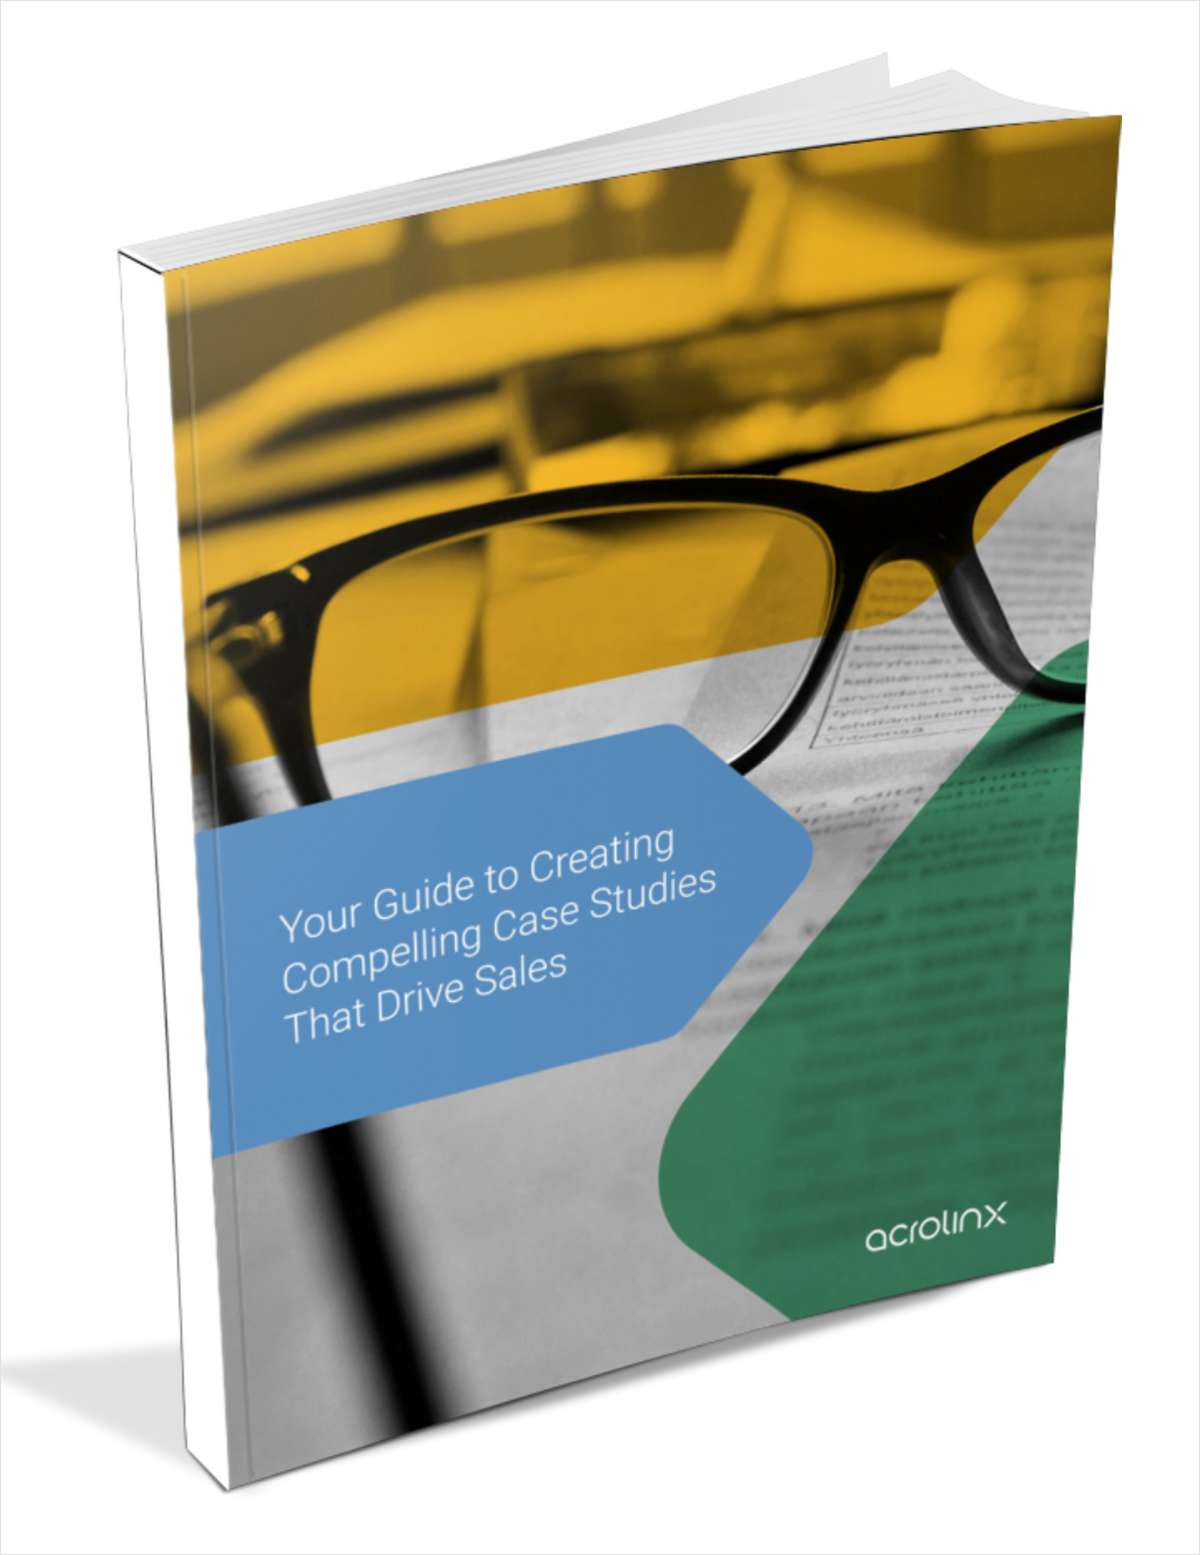 How to Create Compelling Case Studies That Drive Sales